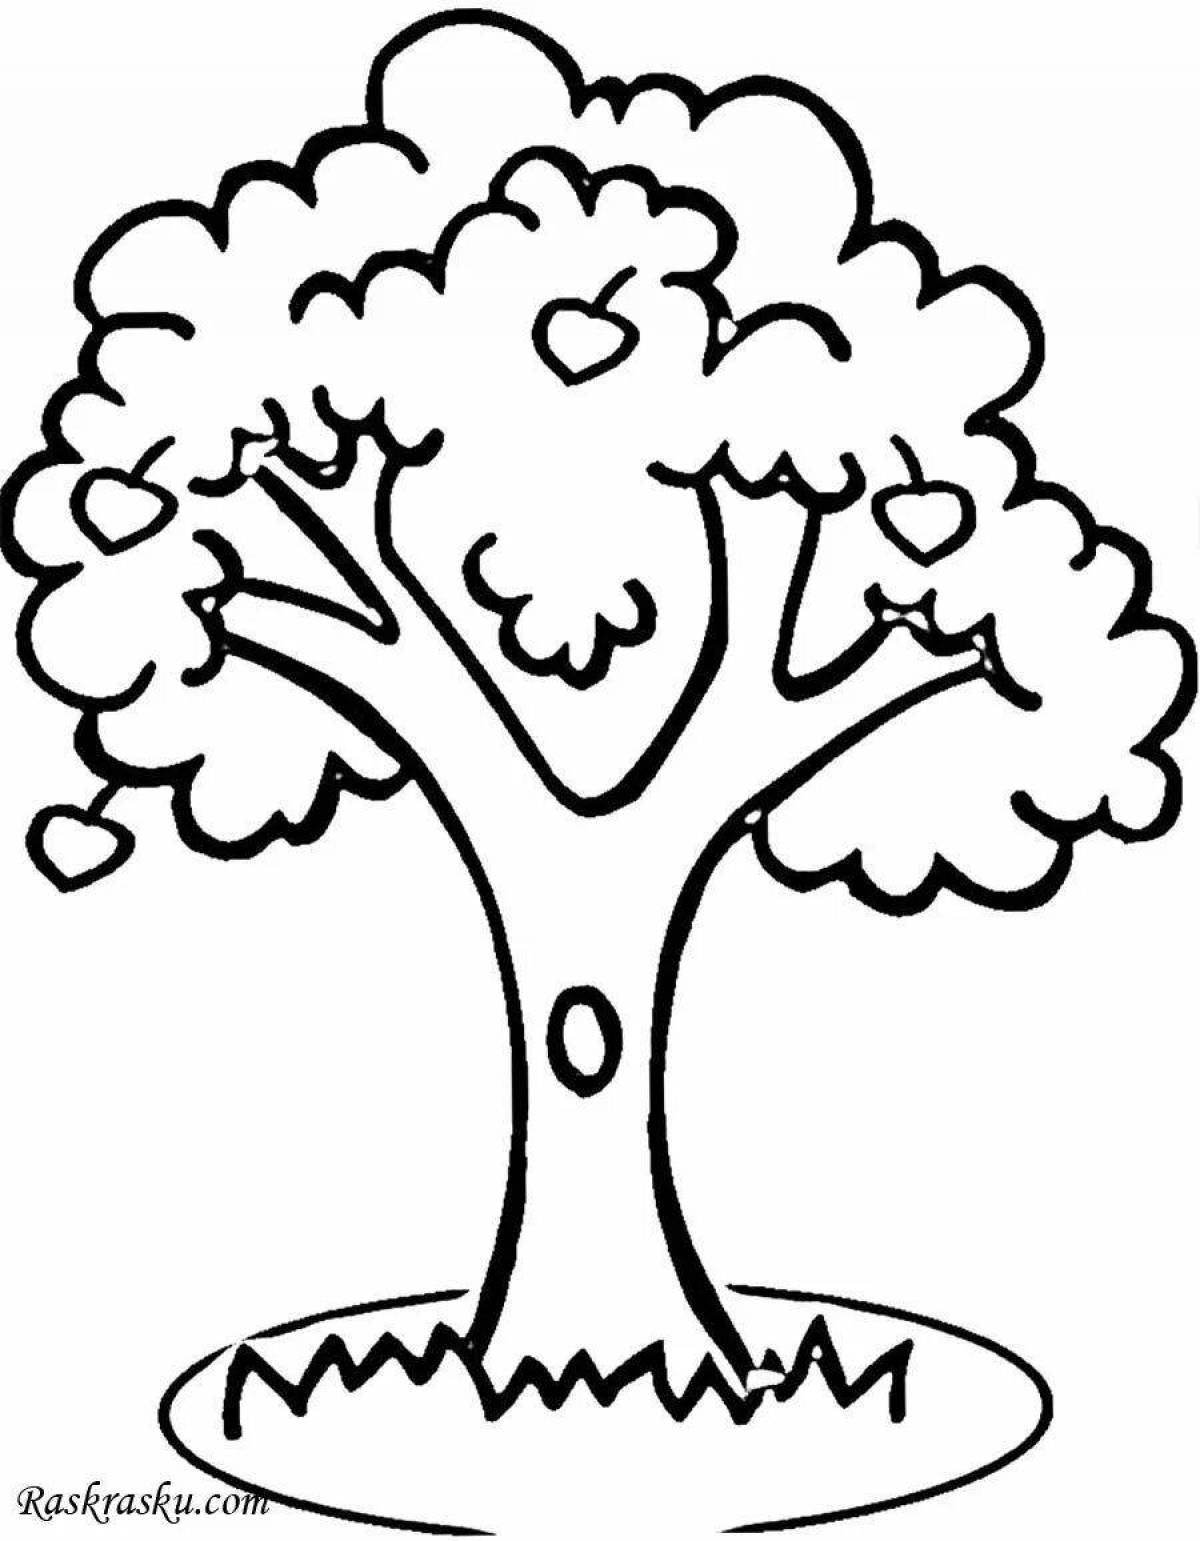 Playful tree drawing for kids